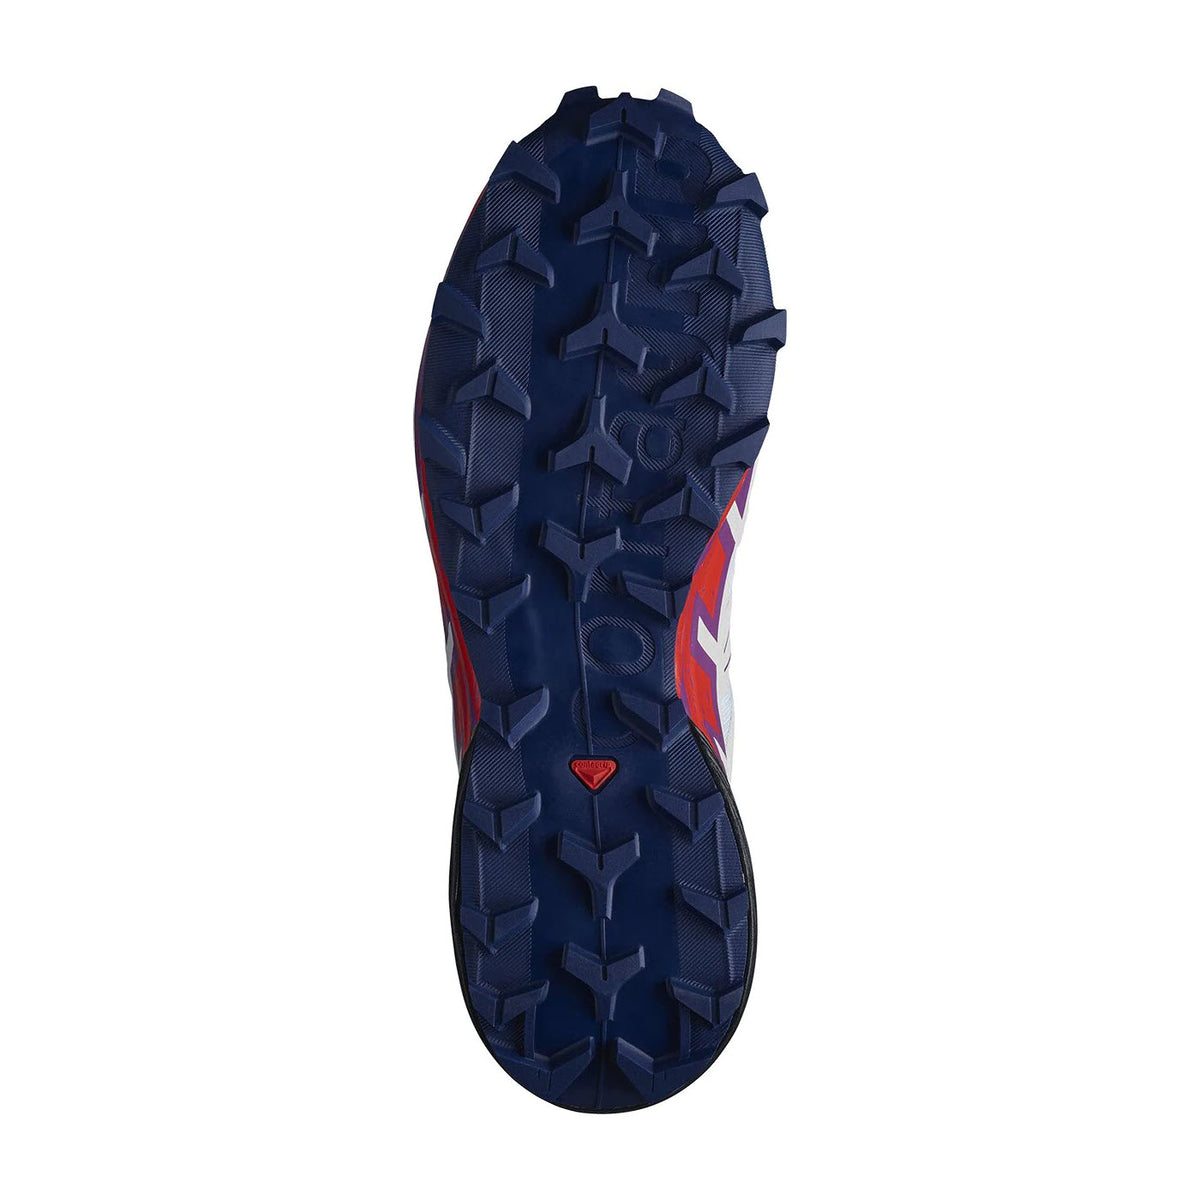 Bottom view of a blue Salomon Speedcross 6 sports shoe sole with distinct tread patterns and red accents, designed for mud evacuation.